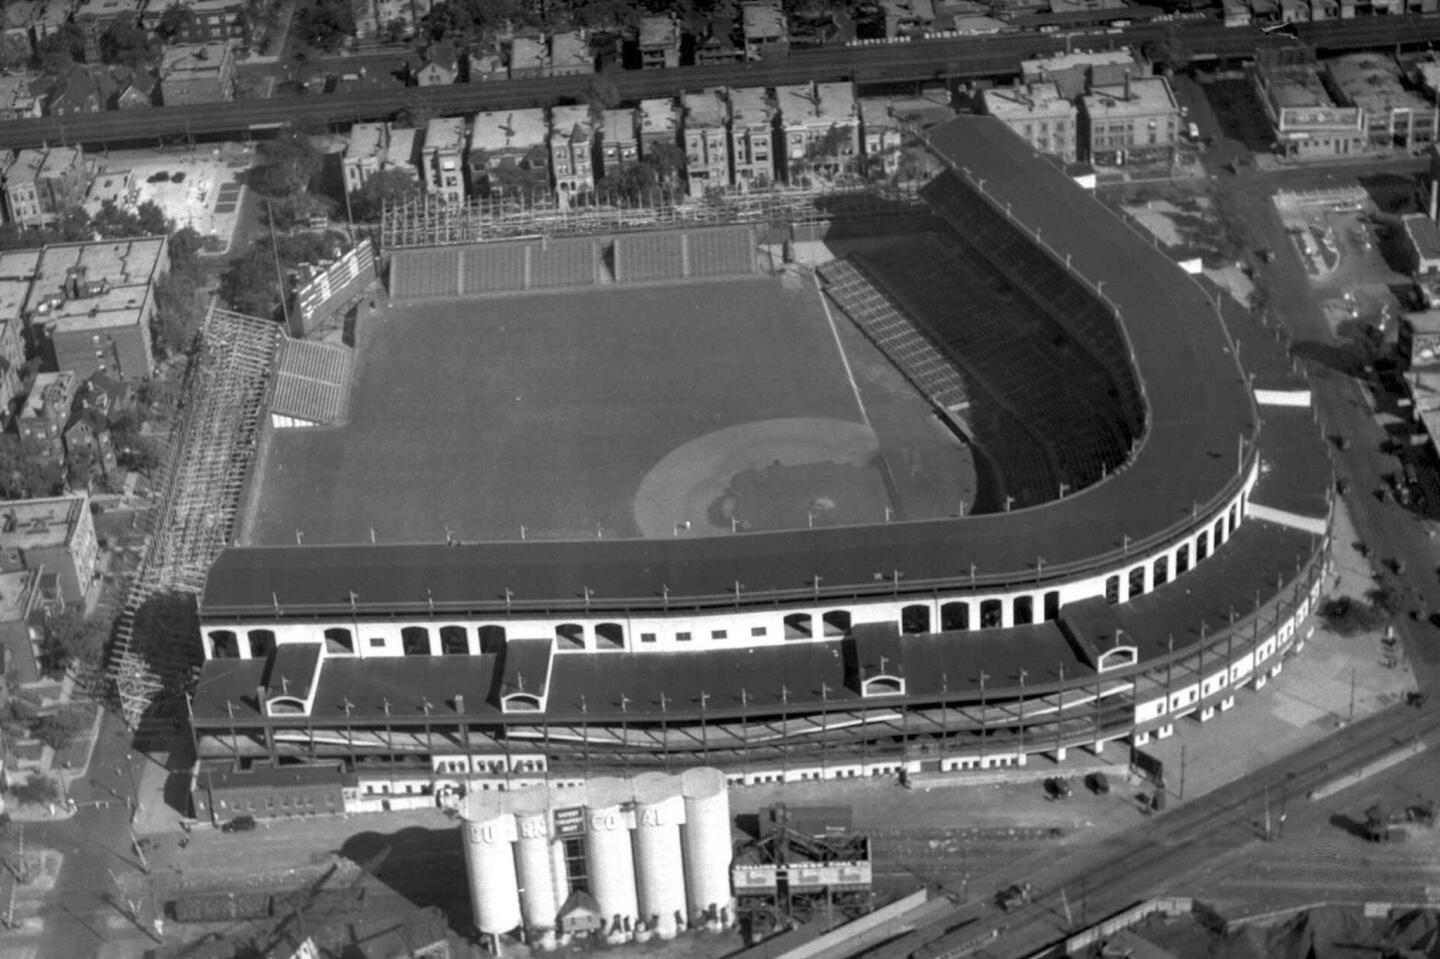 An aerial view of Wrigley Field in September 1932.